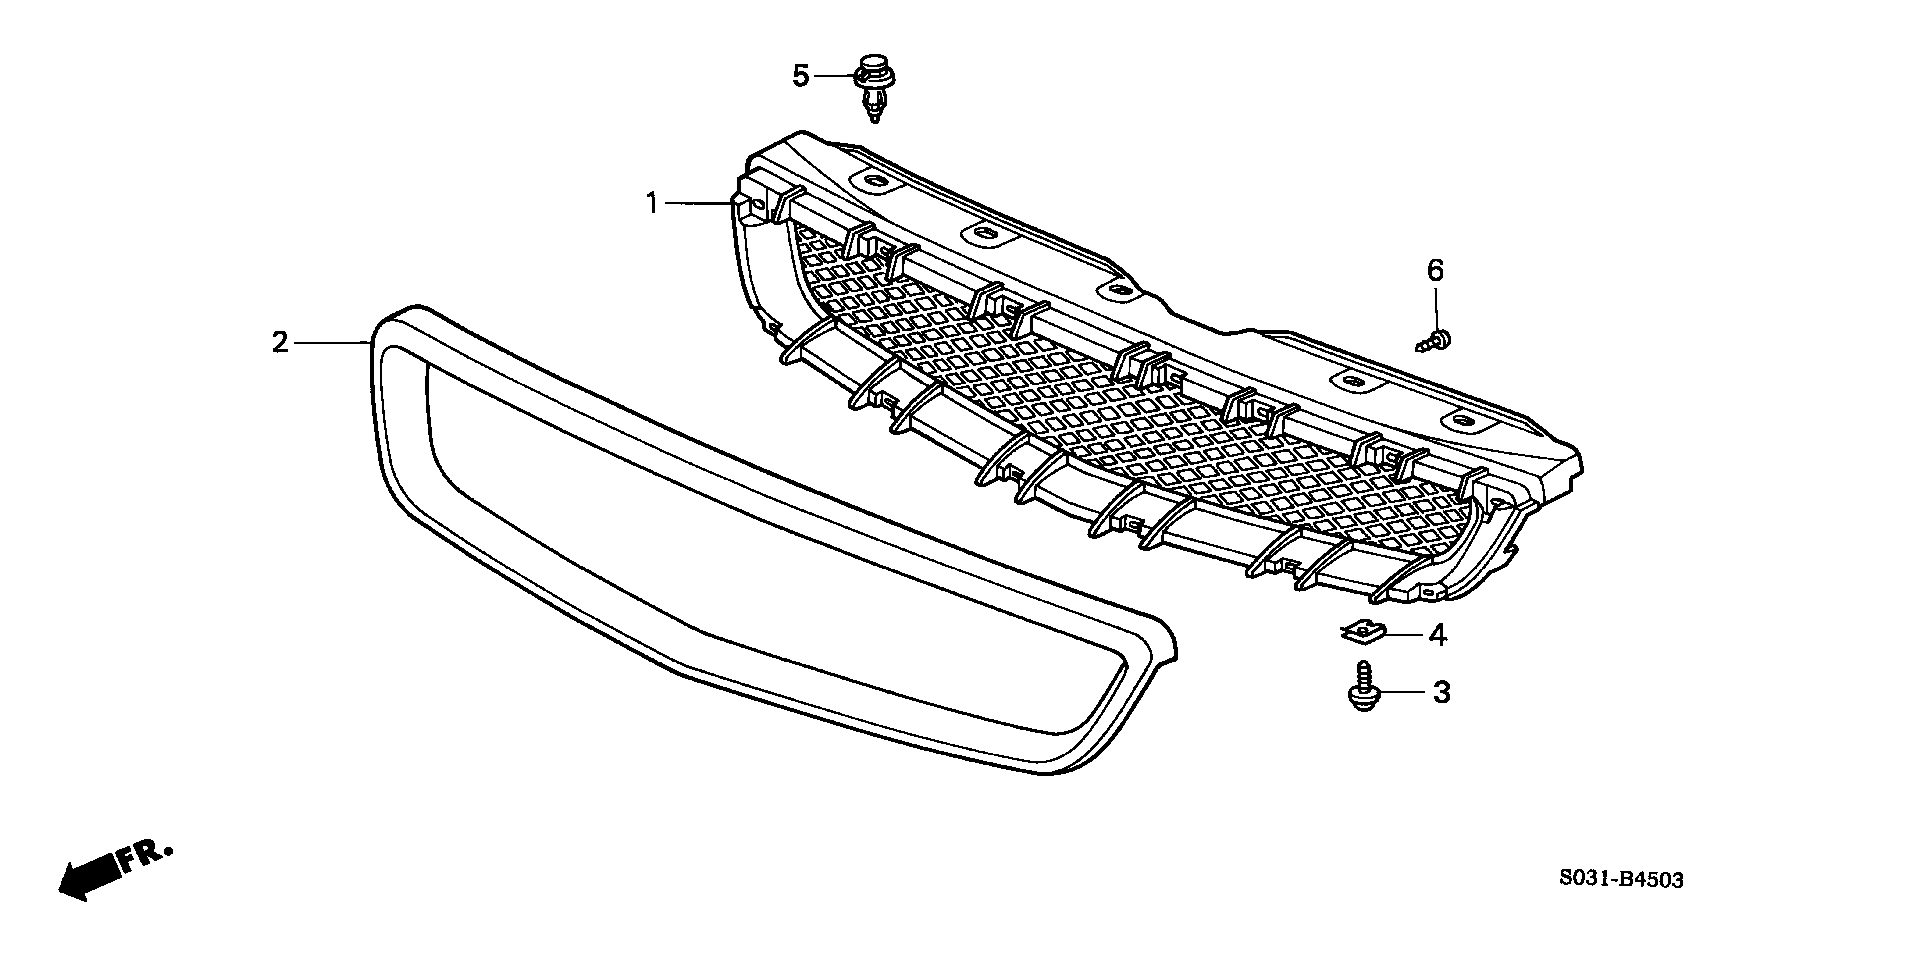 FRONT GRILLE(4)